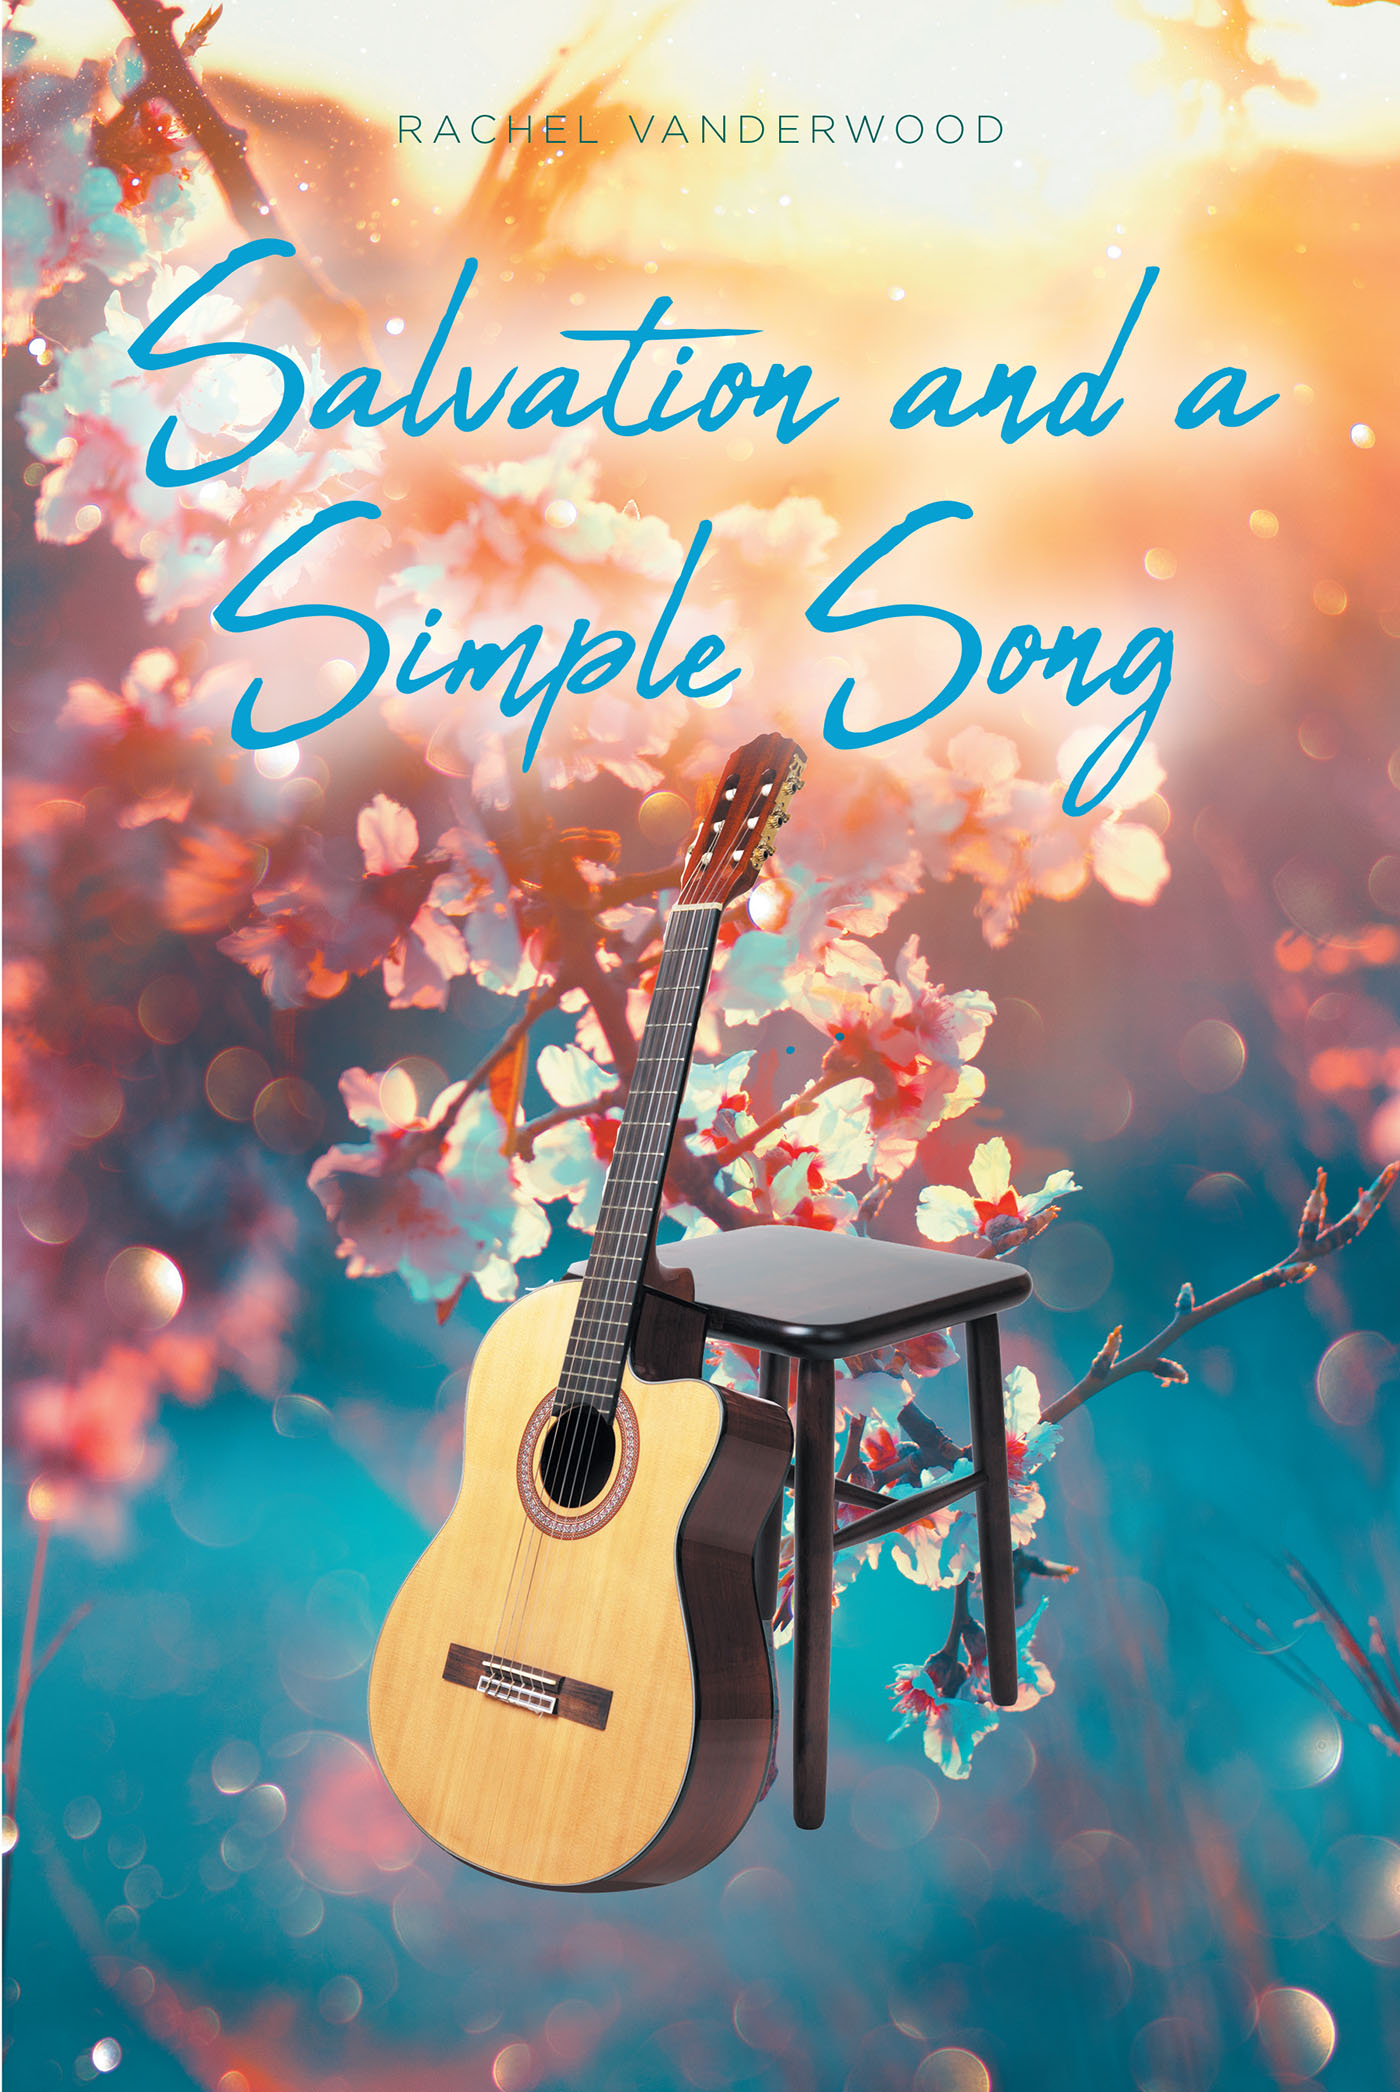 Rachel Vanderwood’s Newly Released "Salvation and a Simple Song" is an Engaging Story of Discovery and Survival as a Musical Gift Opens Unexpected Doors